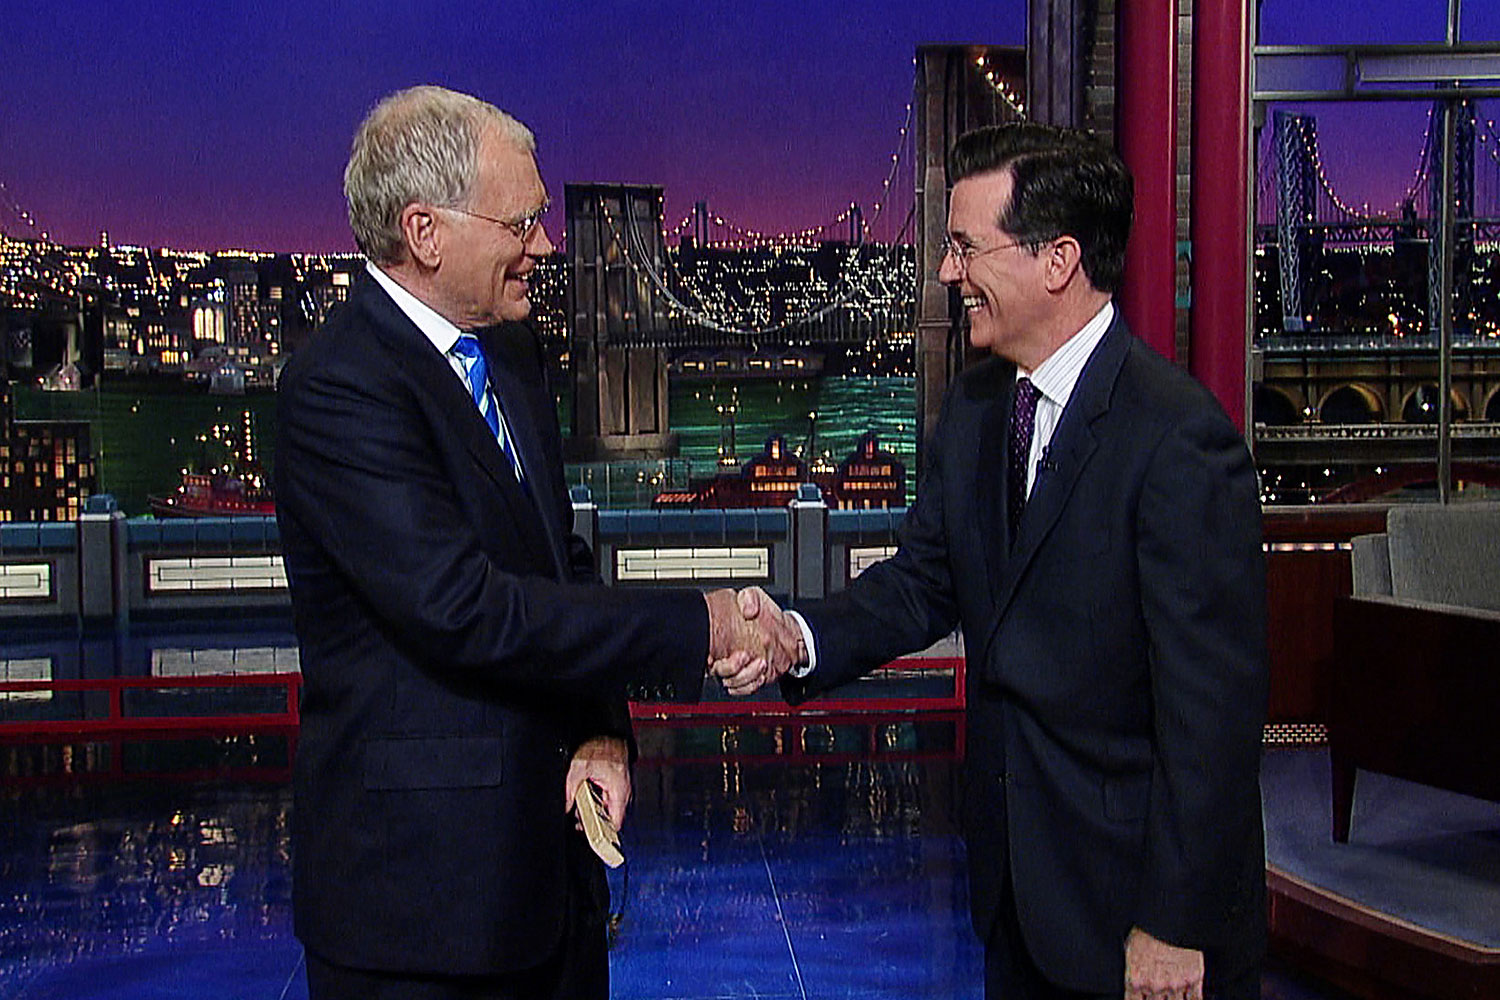 David Letterman shakes hands with fellow talk show host Stephen Colbert after Colbert comes by for a surprise visit on the Late Show, May 4, 2011. (Worldwide Pants Inc.)